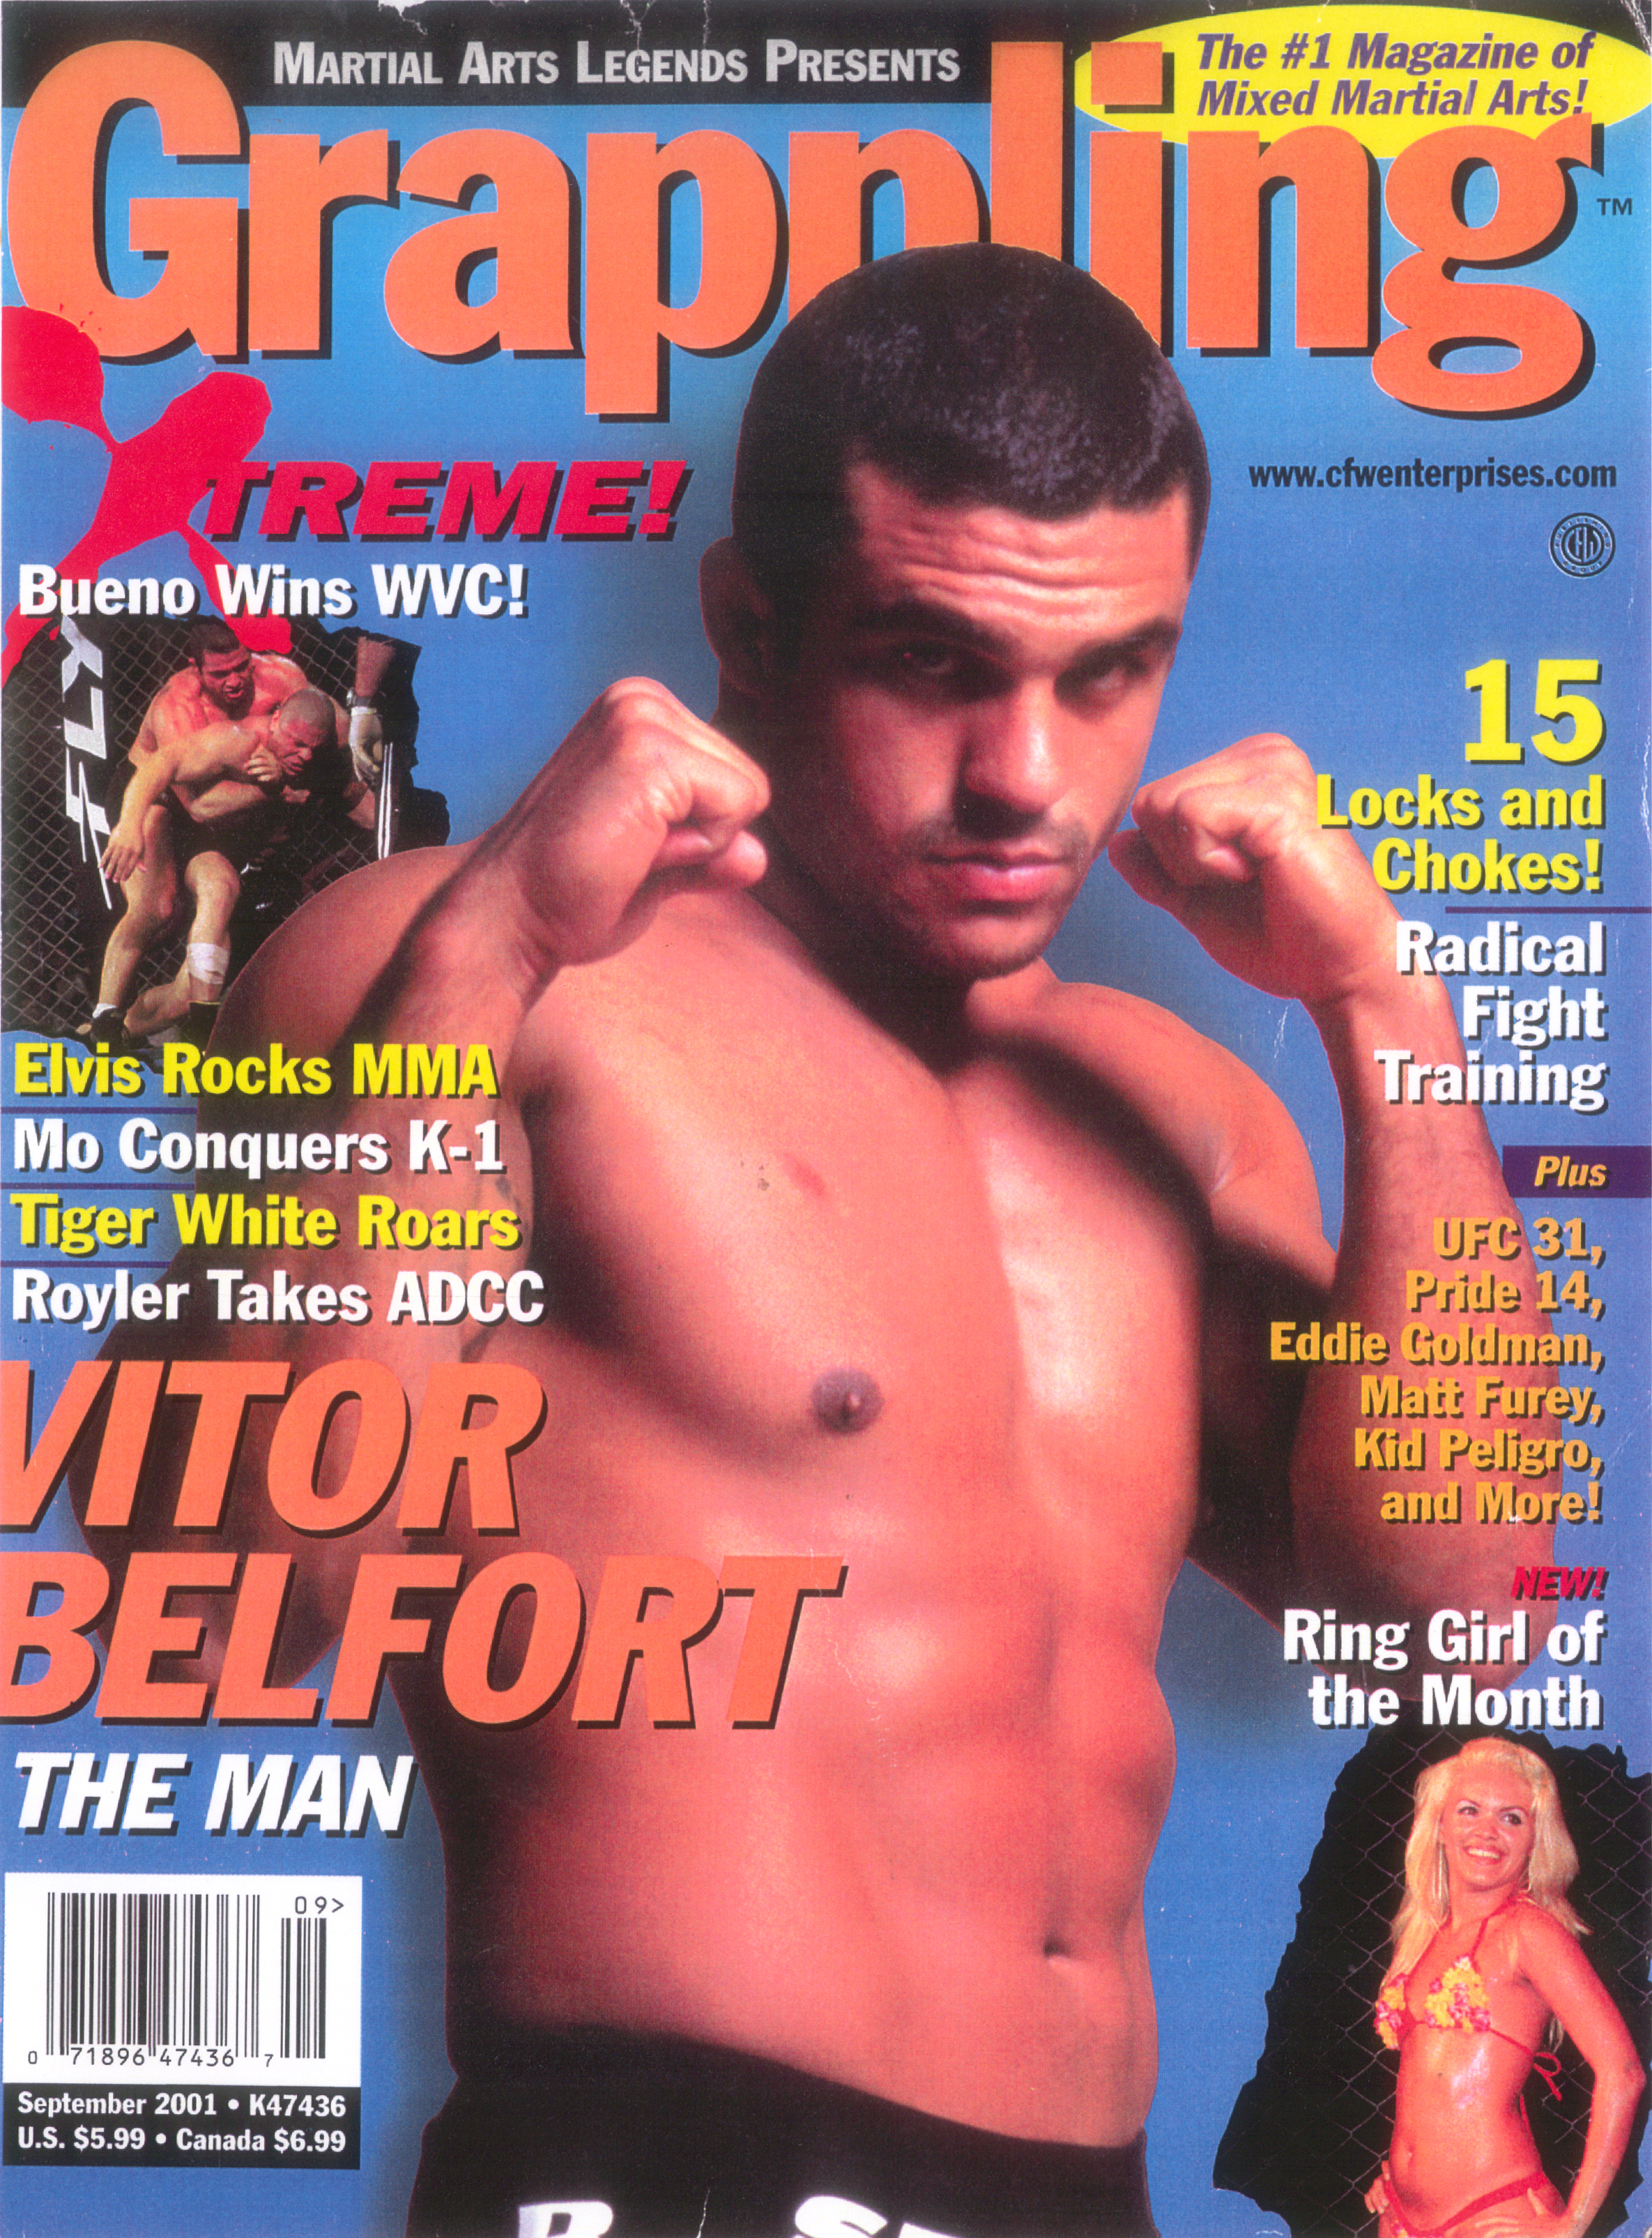 Mariano is on the cover of the magazine. There is an article about him in the magazine regarding his fight with Francisco Bueno.